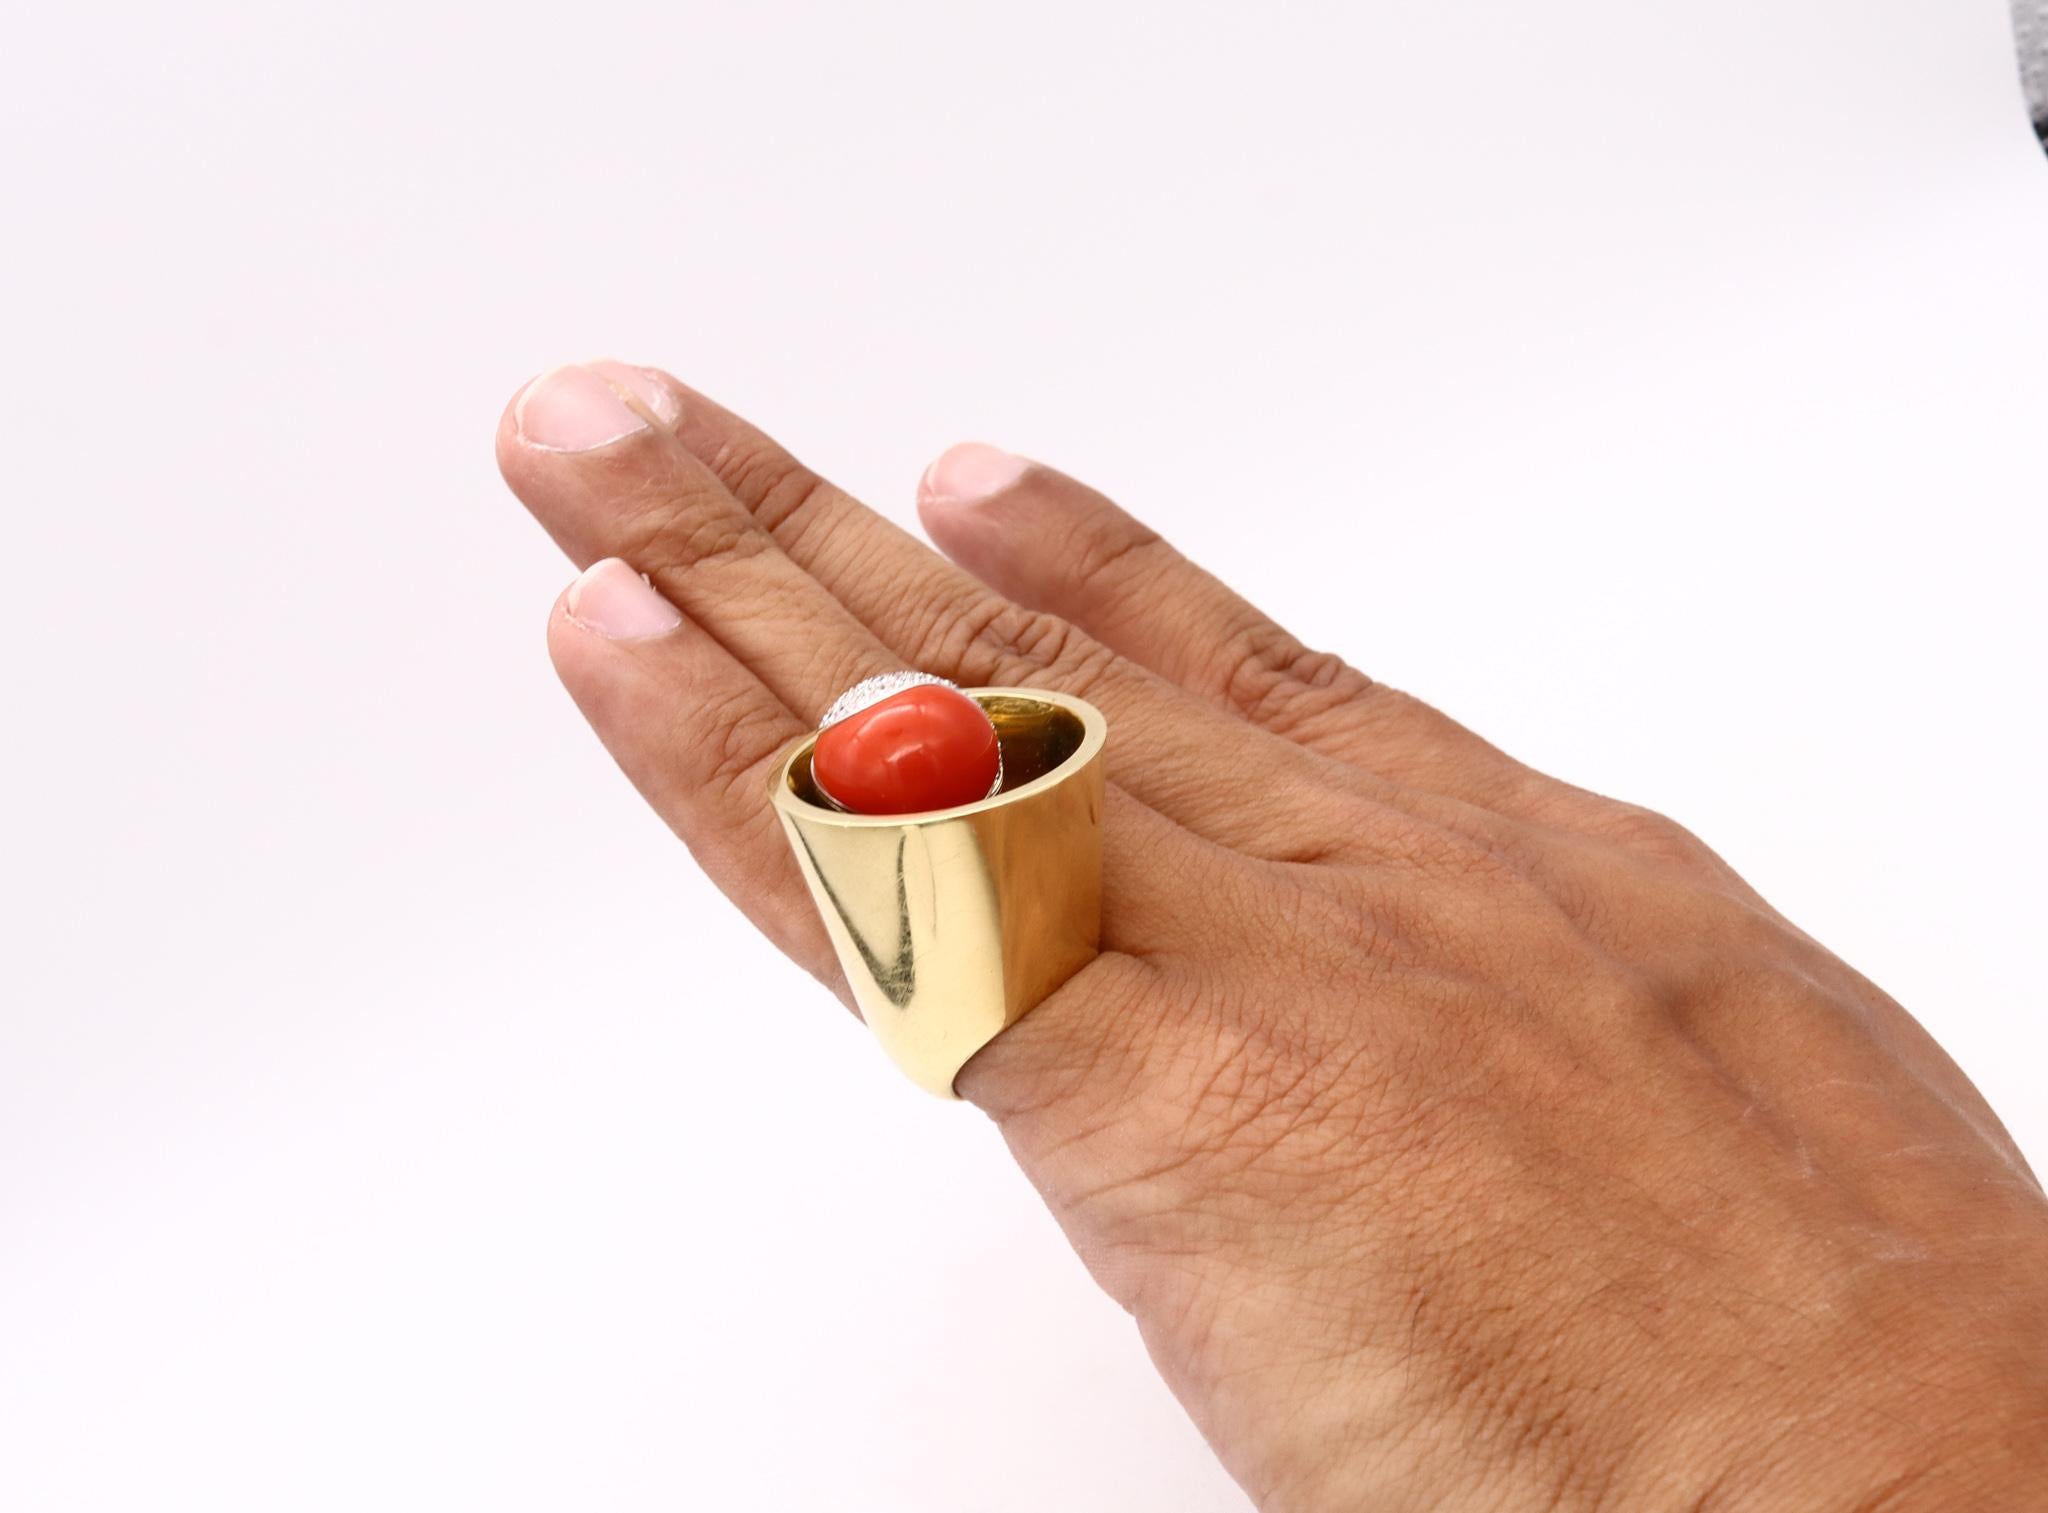 Sculptural op art Yin-Yang Ring with Gemstones.

An ultra-modern geometric piece of art from the Spatialism period, of the 1970s. This unusual and rare one-of-a-kind ring is made of 18 karat solid yellow gold with white gold details. The surfaces